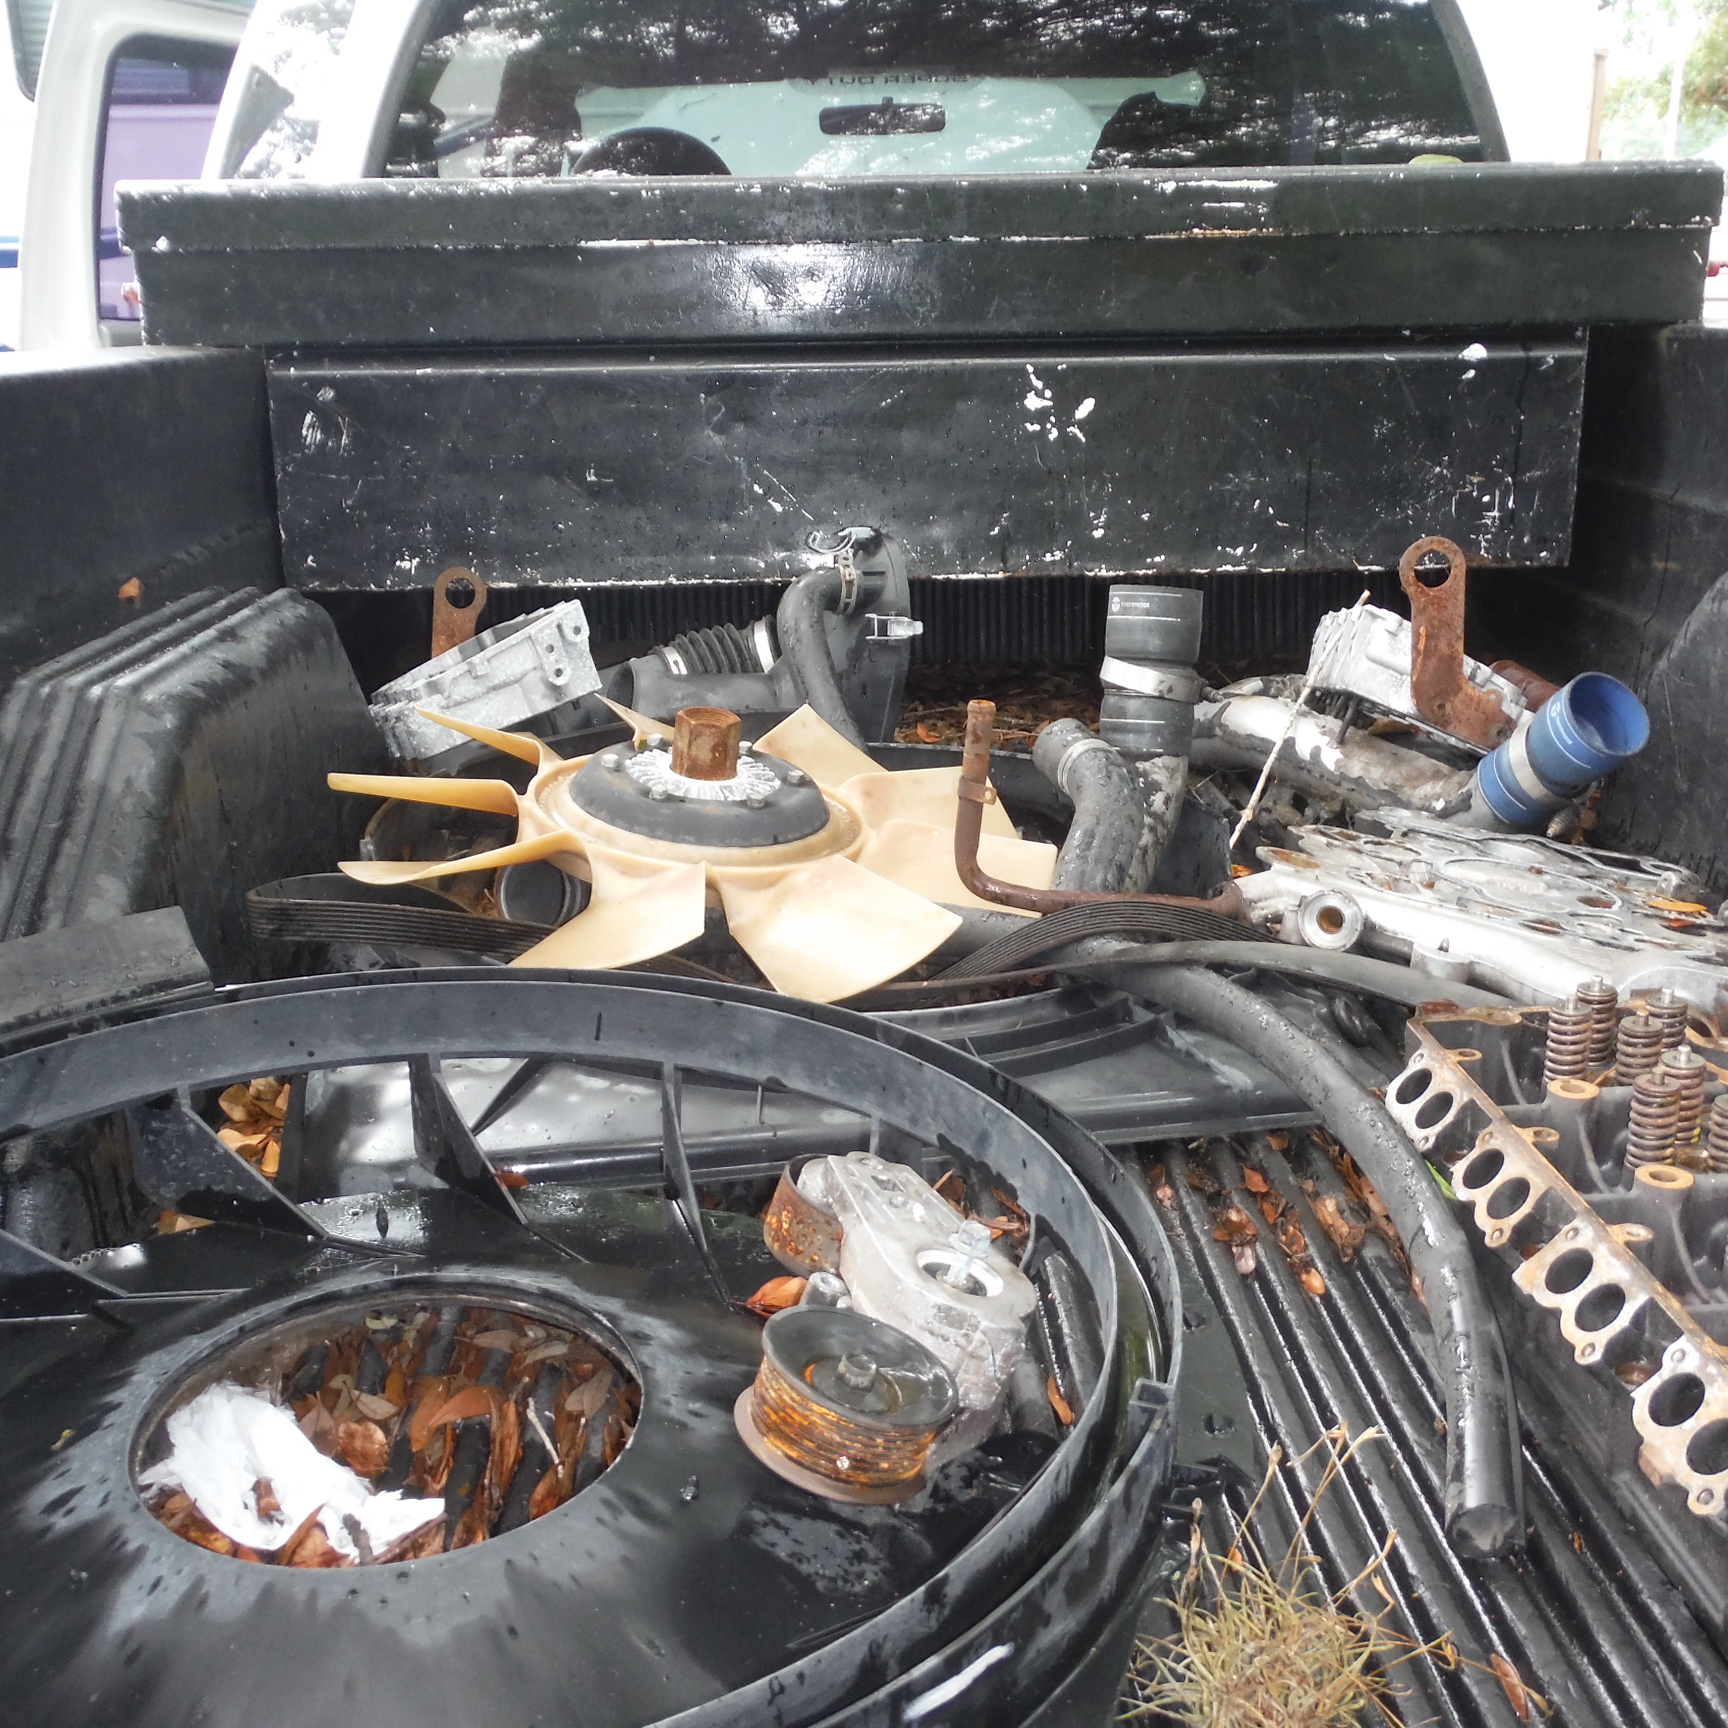 parts left in the bed of the truck to rust and corrode